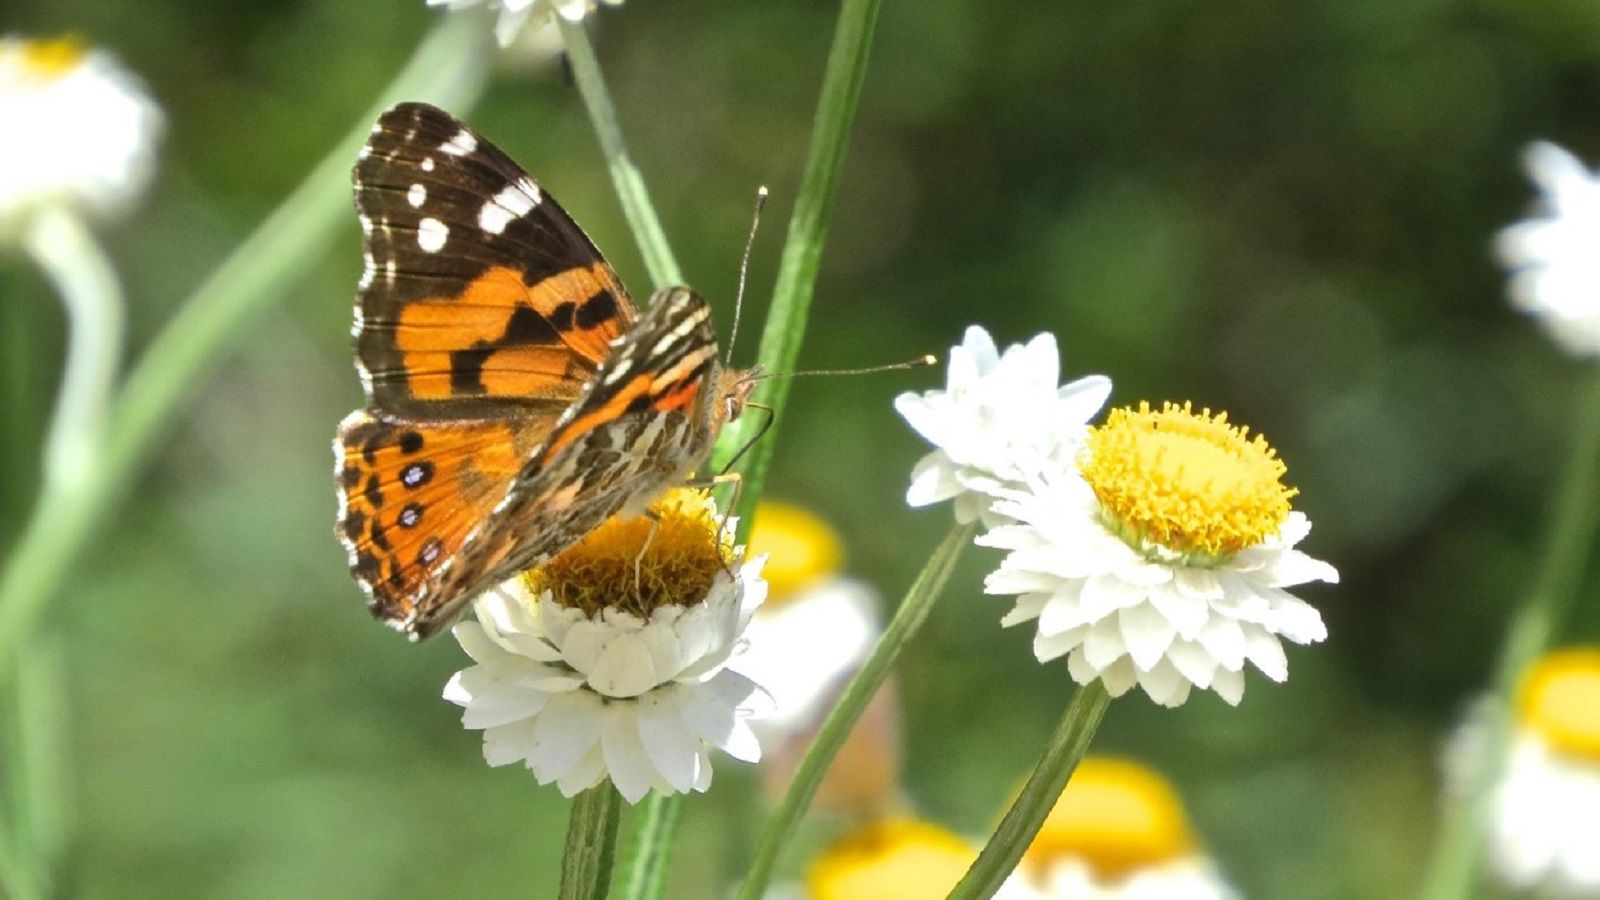 An orange and black butterfly perched on a white flower with a yellow centre. banner image